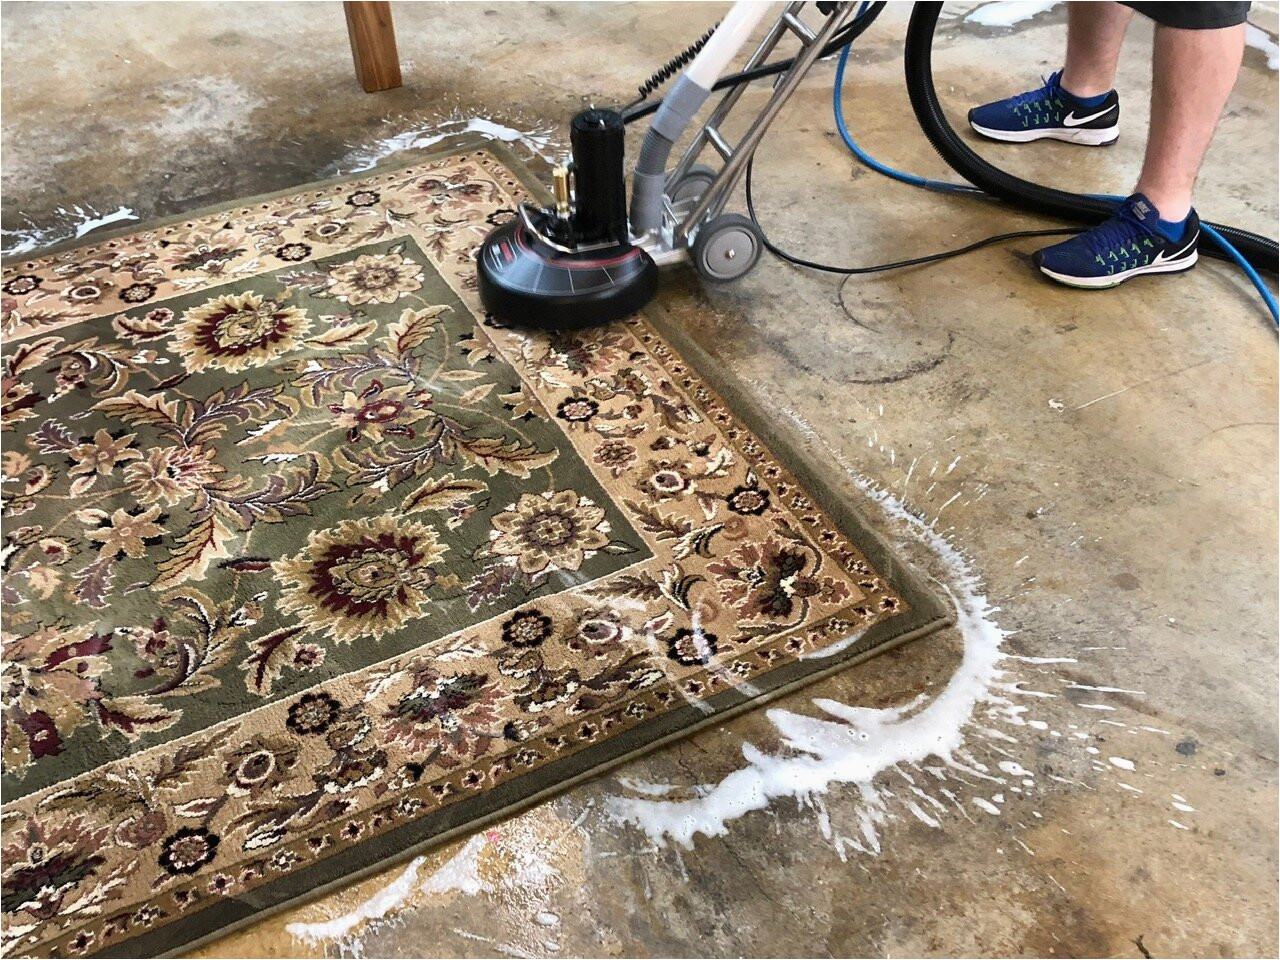 Area Rug Cleaning Pick Up Near Me area Rugs â Scanlon’s Dry Cleaning & Laundry- Hudson Valley’s Dry …